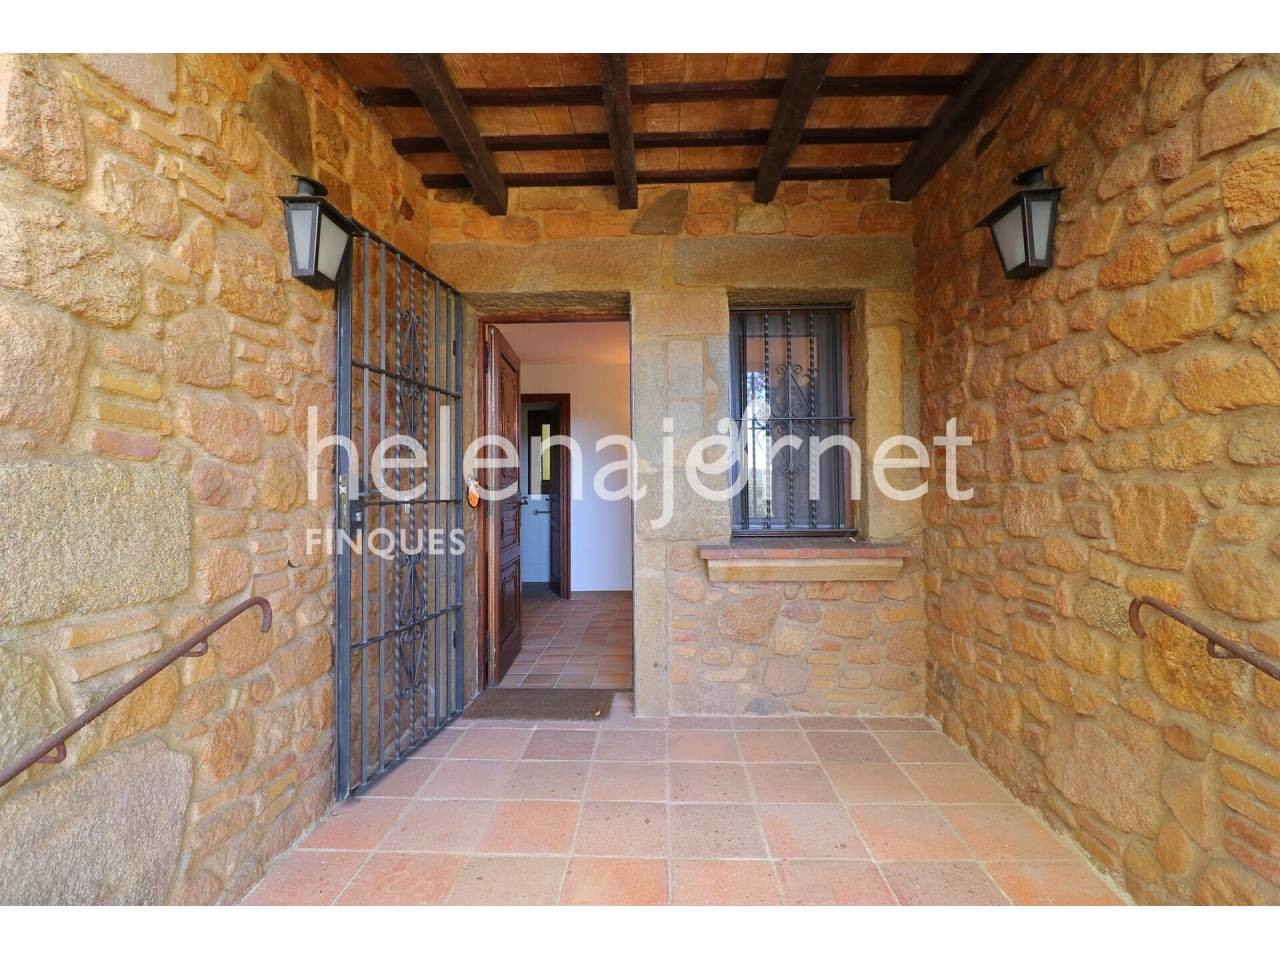 Great rustic-style estate with a big plot of land in Solius - 1656